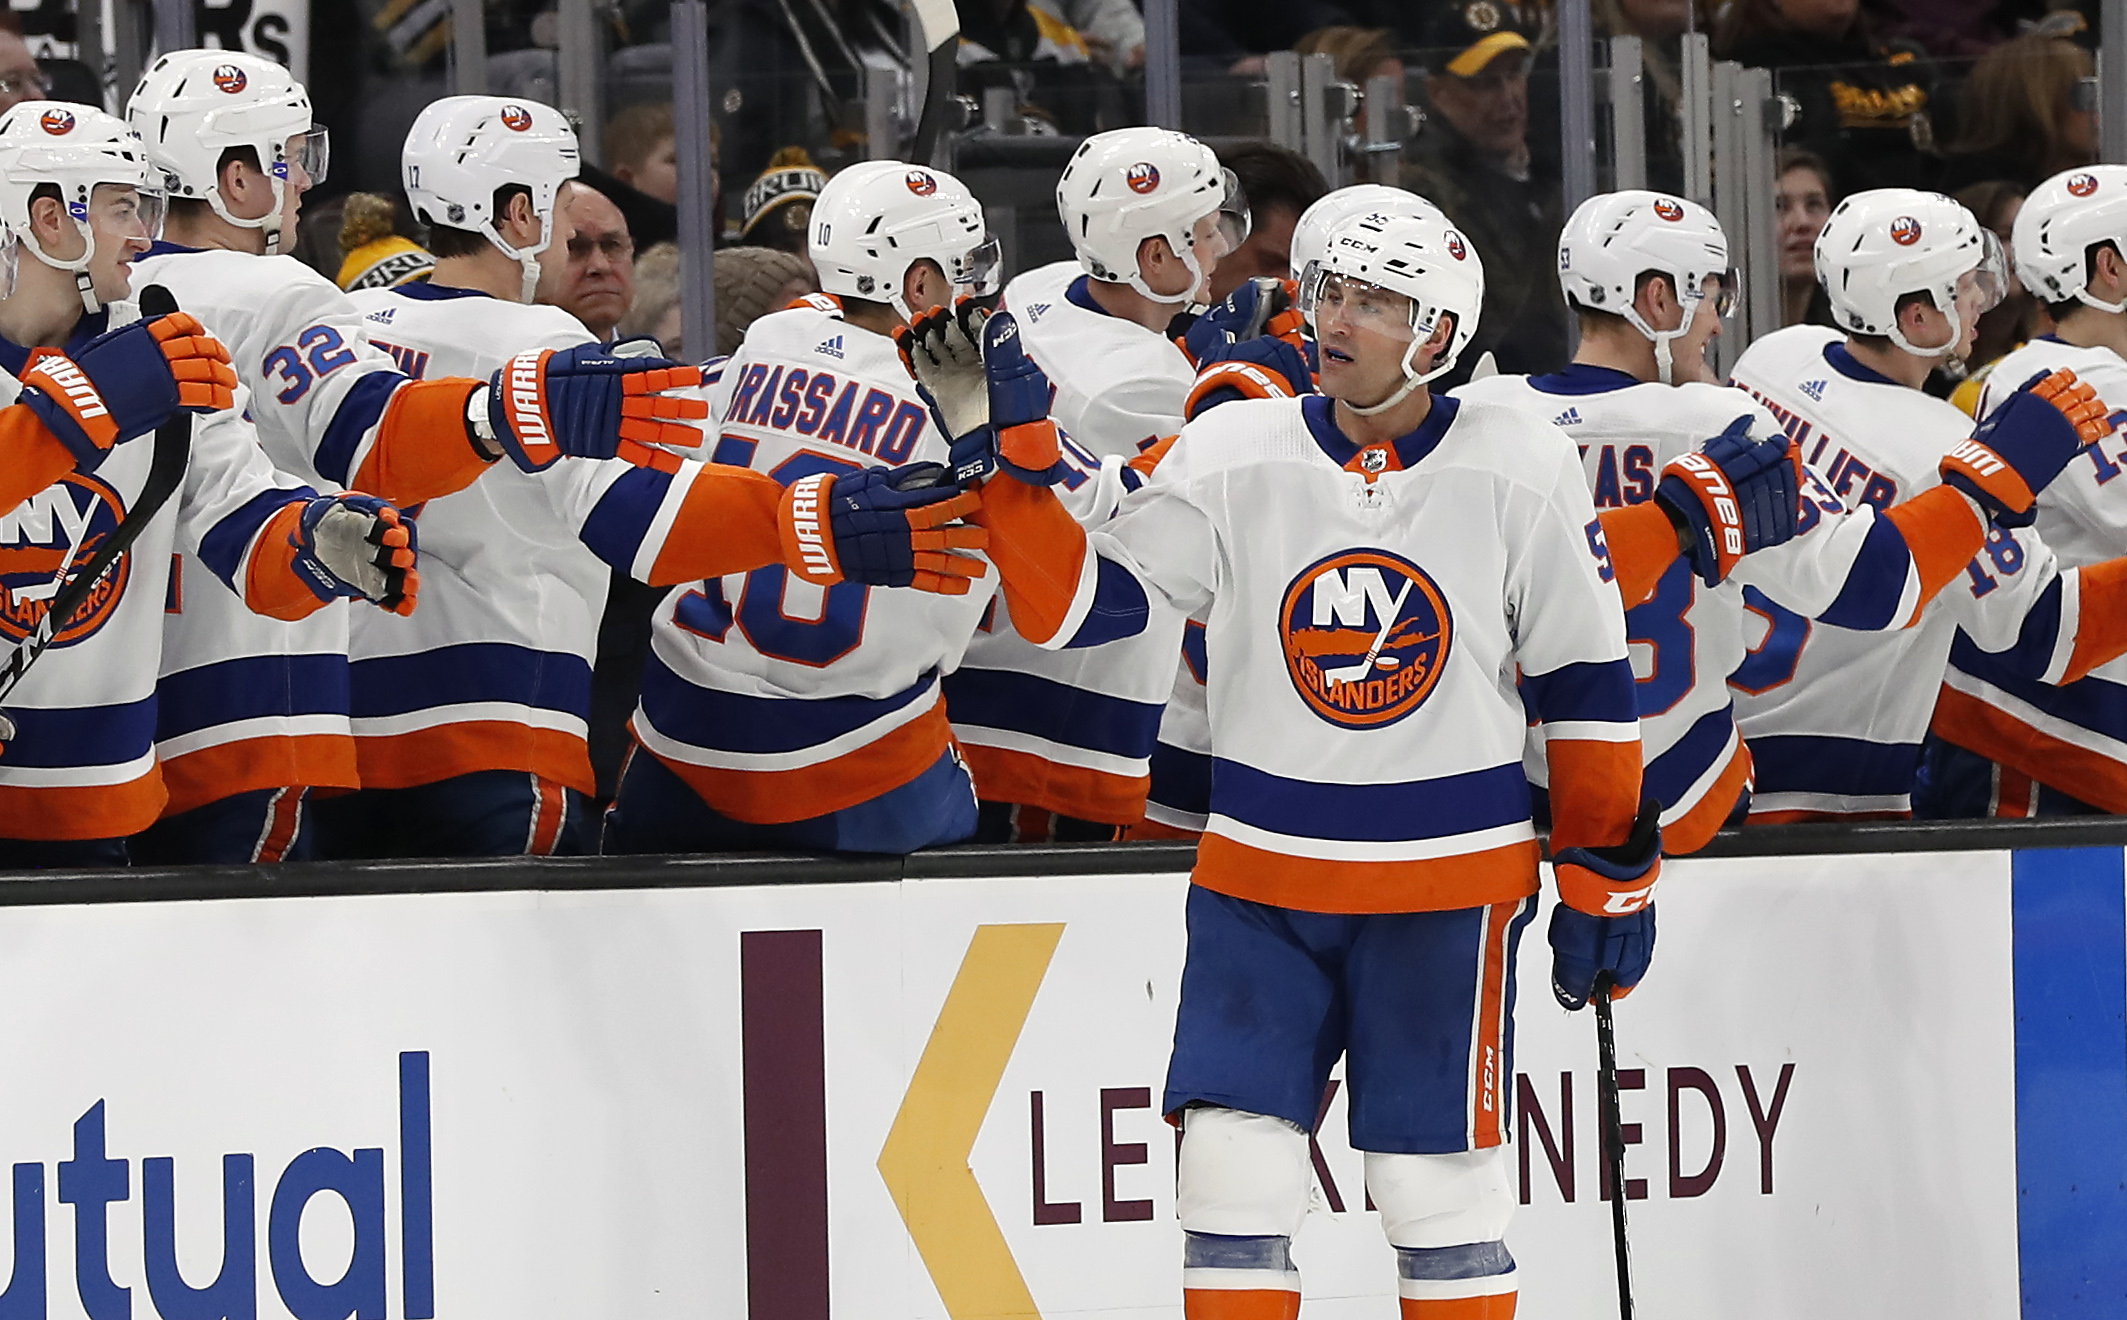 Dec 19, 2019; Boston, MA, USA; New York Islanders defenseman Johnny Boychuk (55) celebrates with teammates on the bench after scoring a goal against the Boston Bruins during the second period at TD Garden. Mandatory Credit: Winslow Townson-USA TODAY Sports